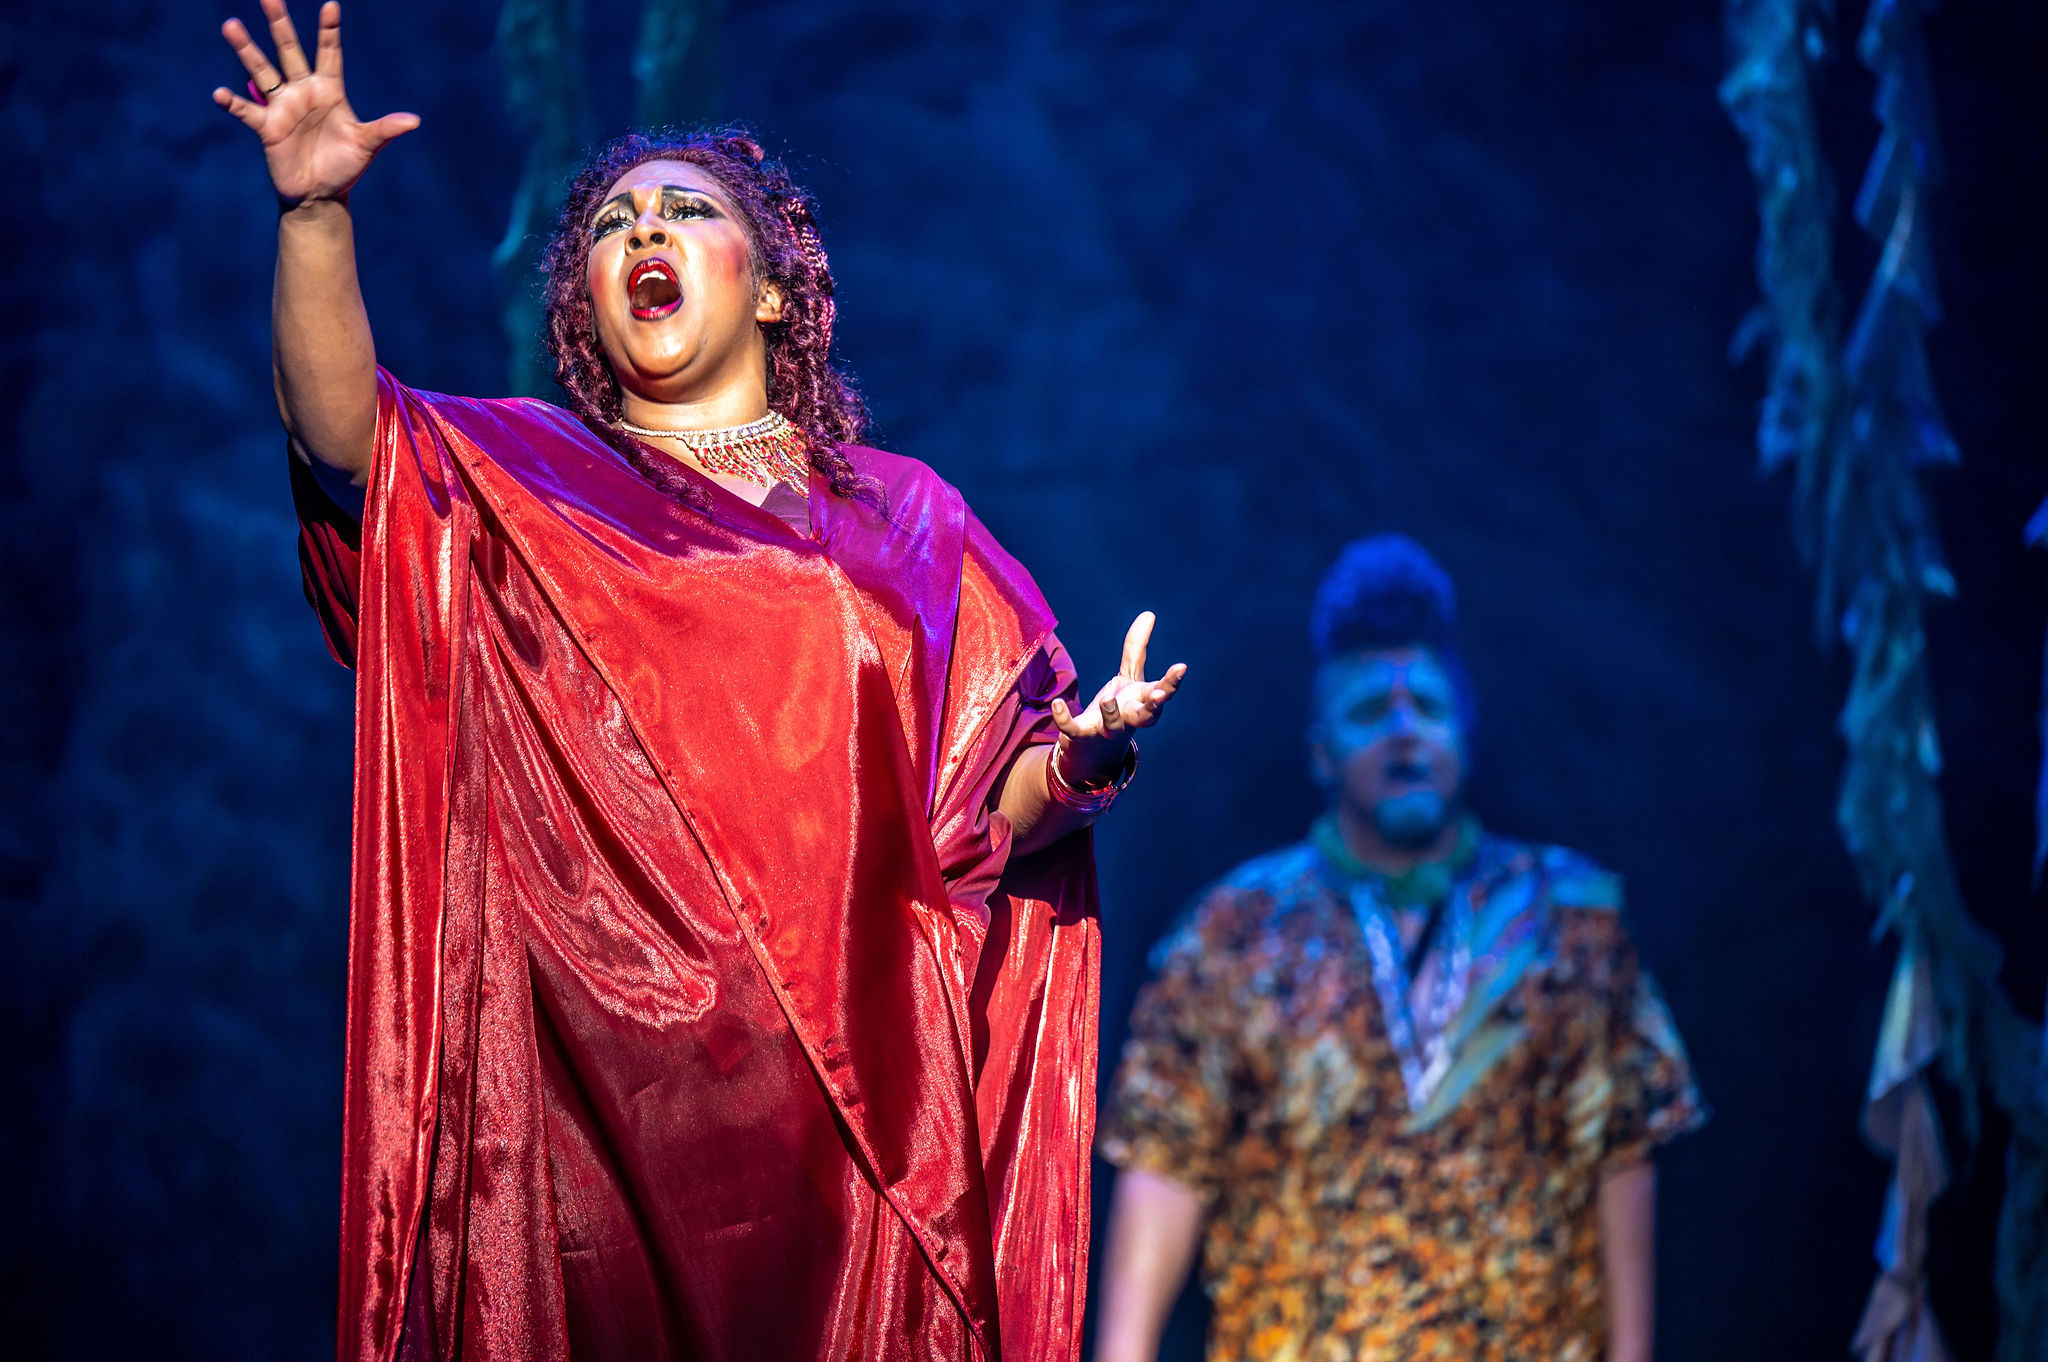 Of The Sea | Tapestry Opera Chantal Nurse as Serwa stands with her mouth open, mid-song. Her right arm is outstretched. She is wearing a shiny red gown.